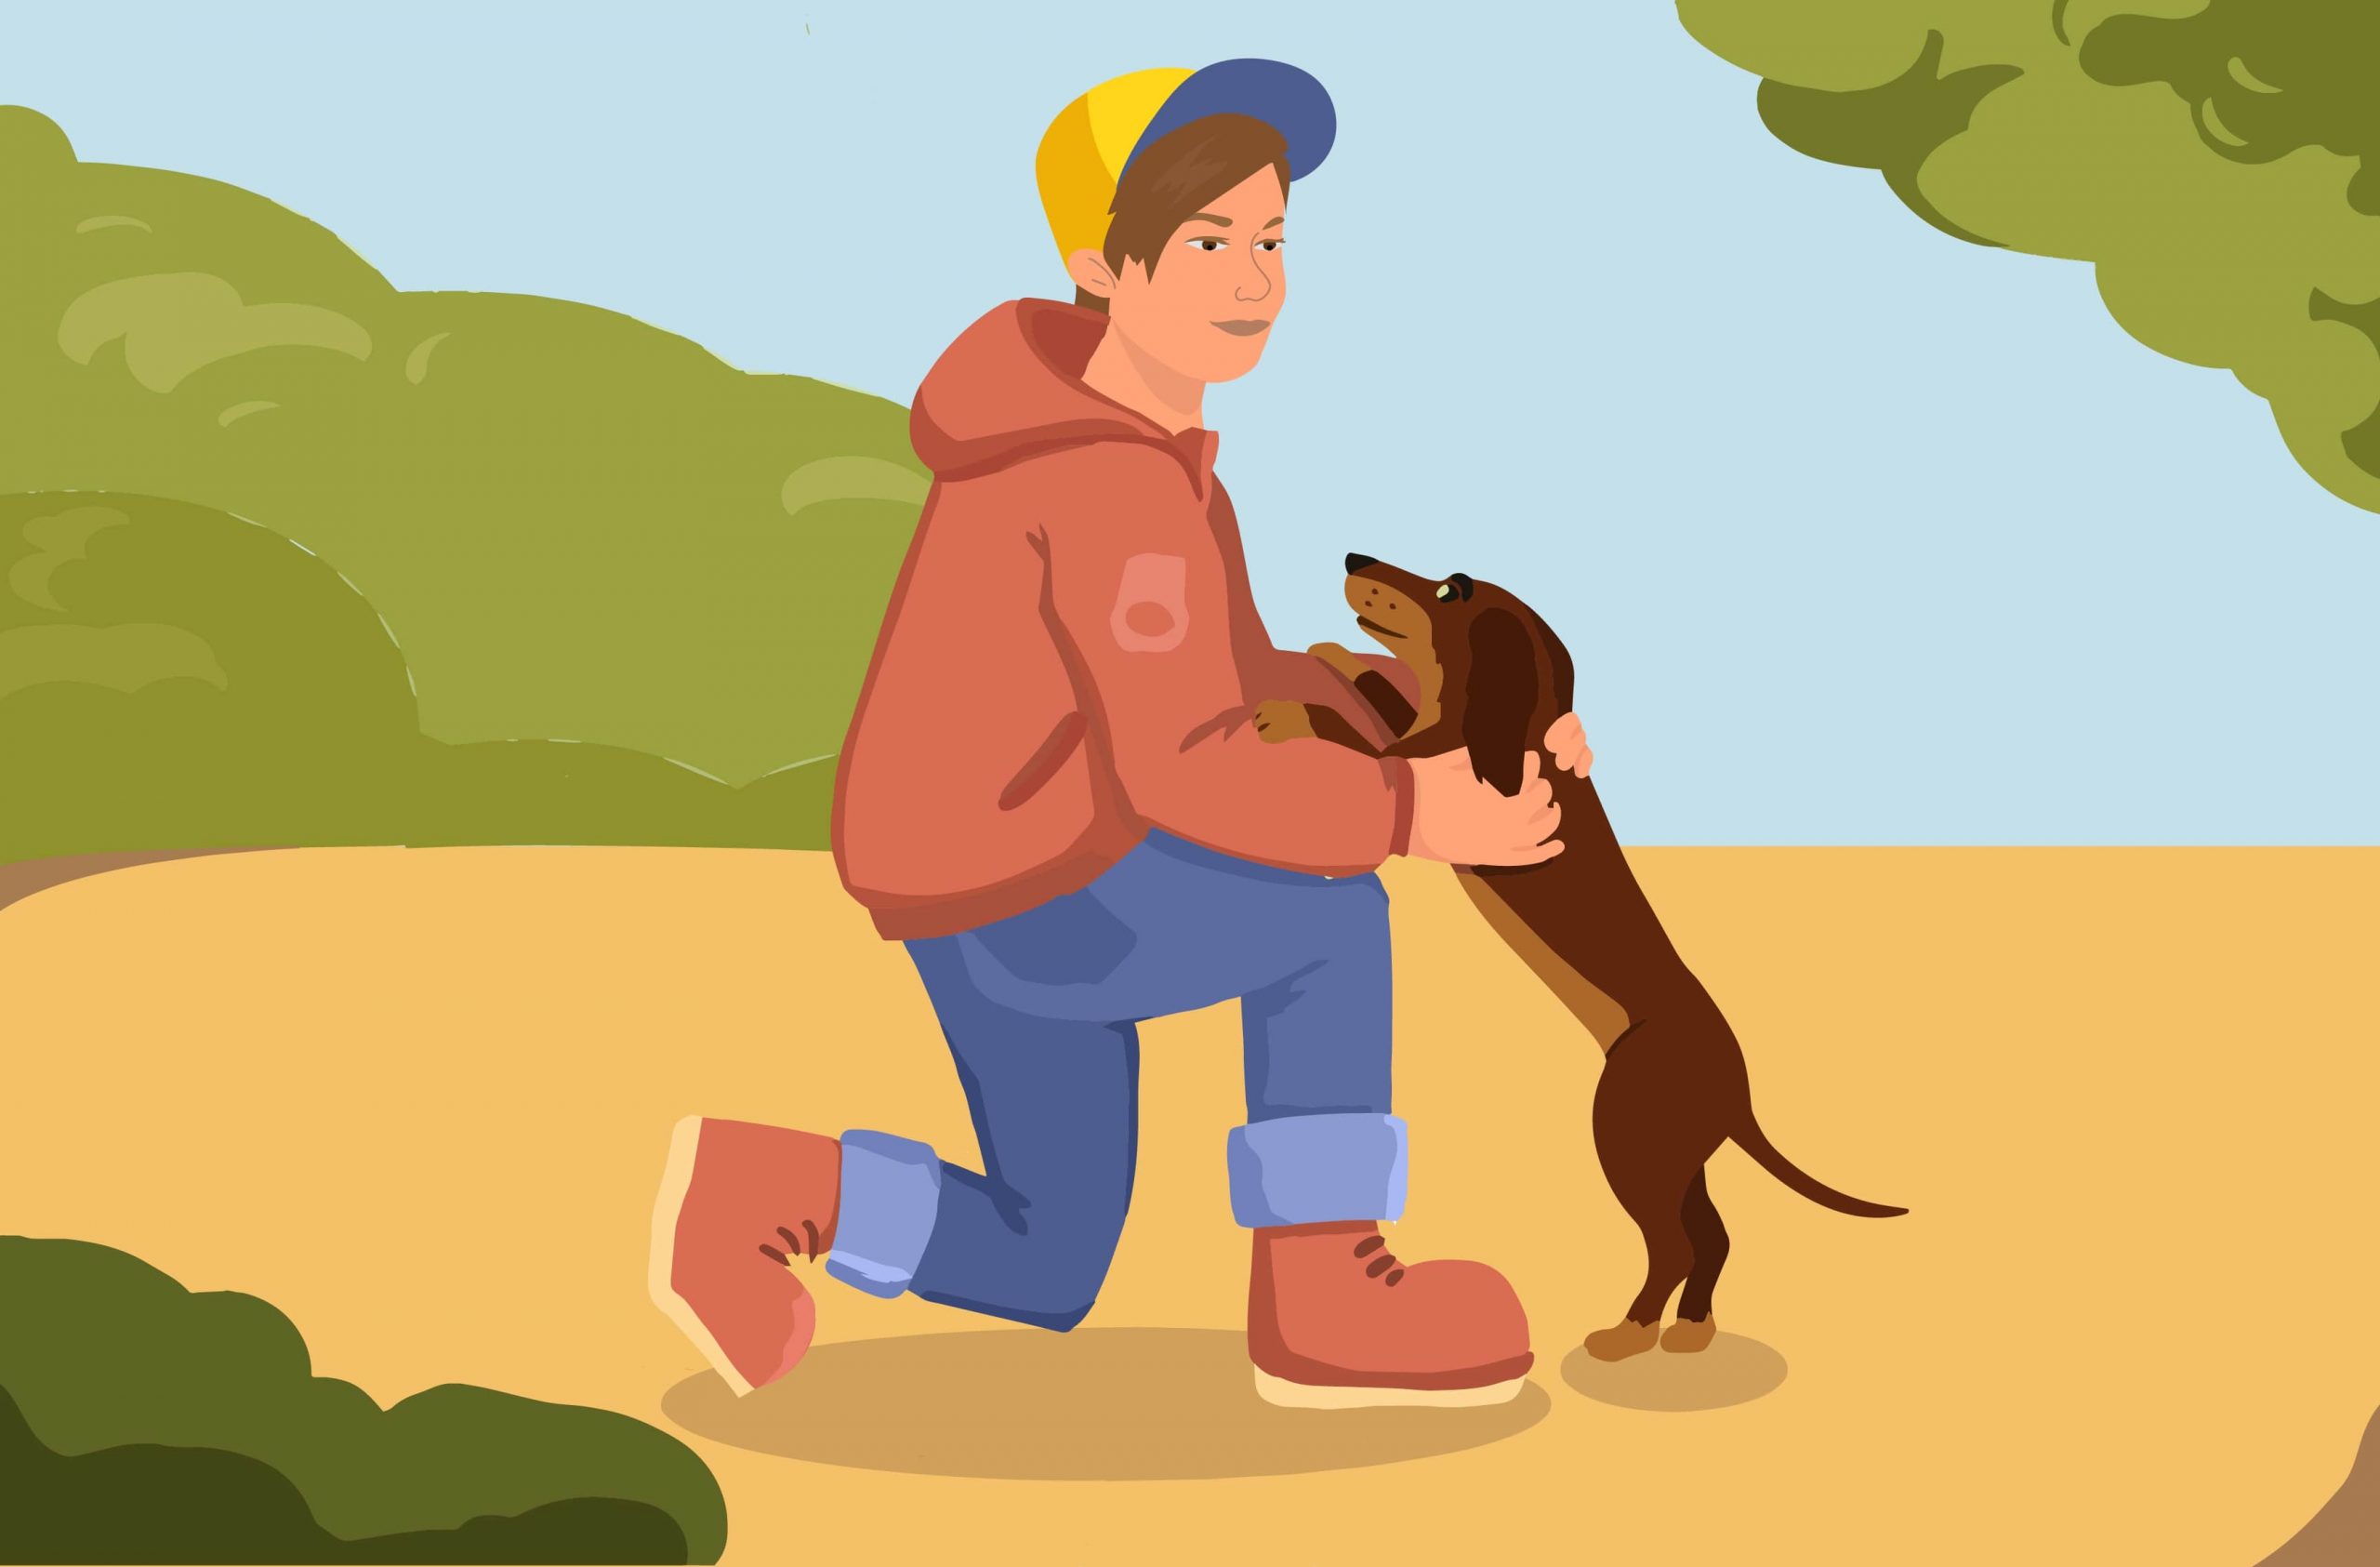 Owning A Dog Is Good For Children’s Emotional Development